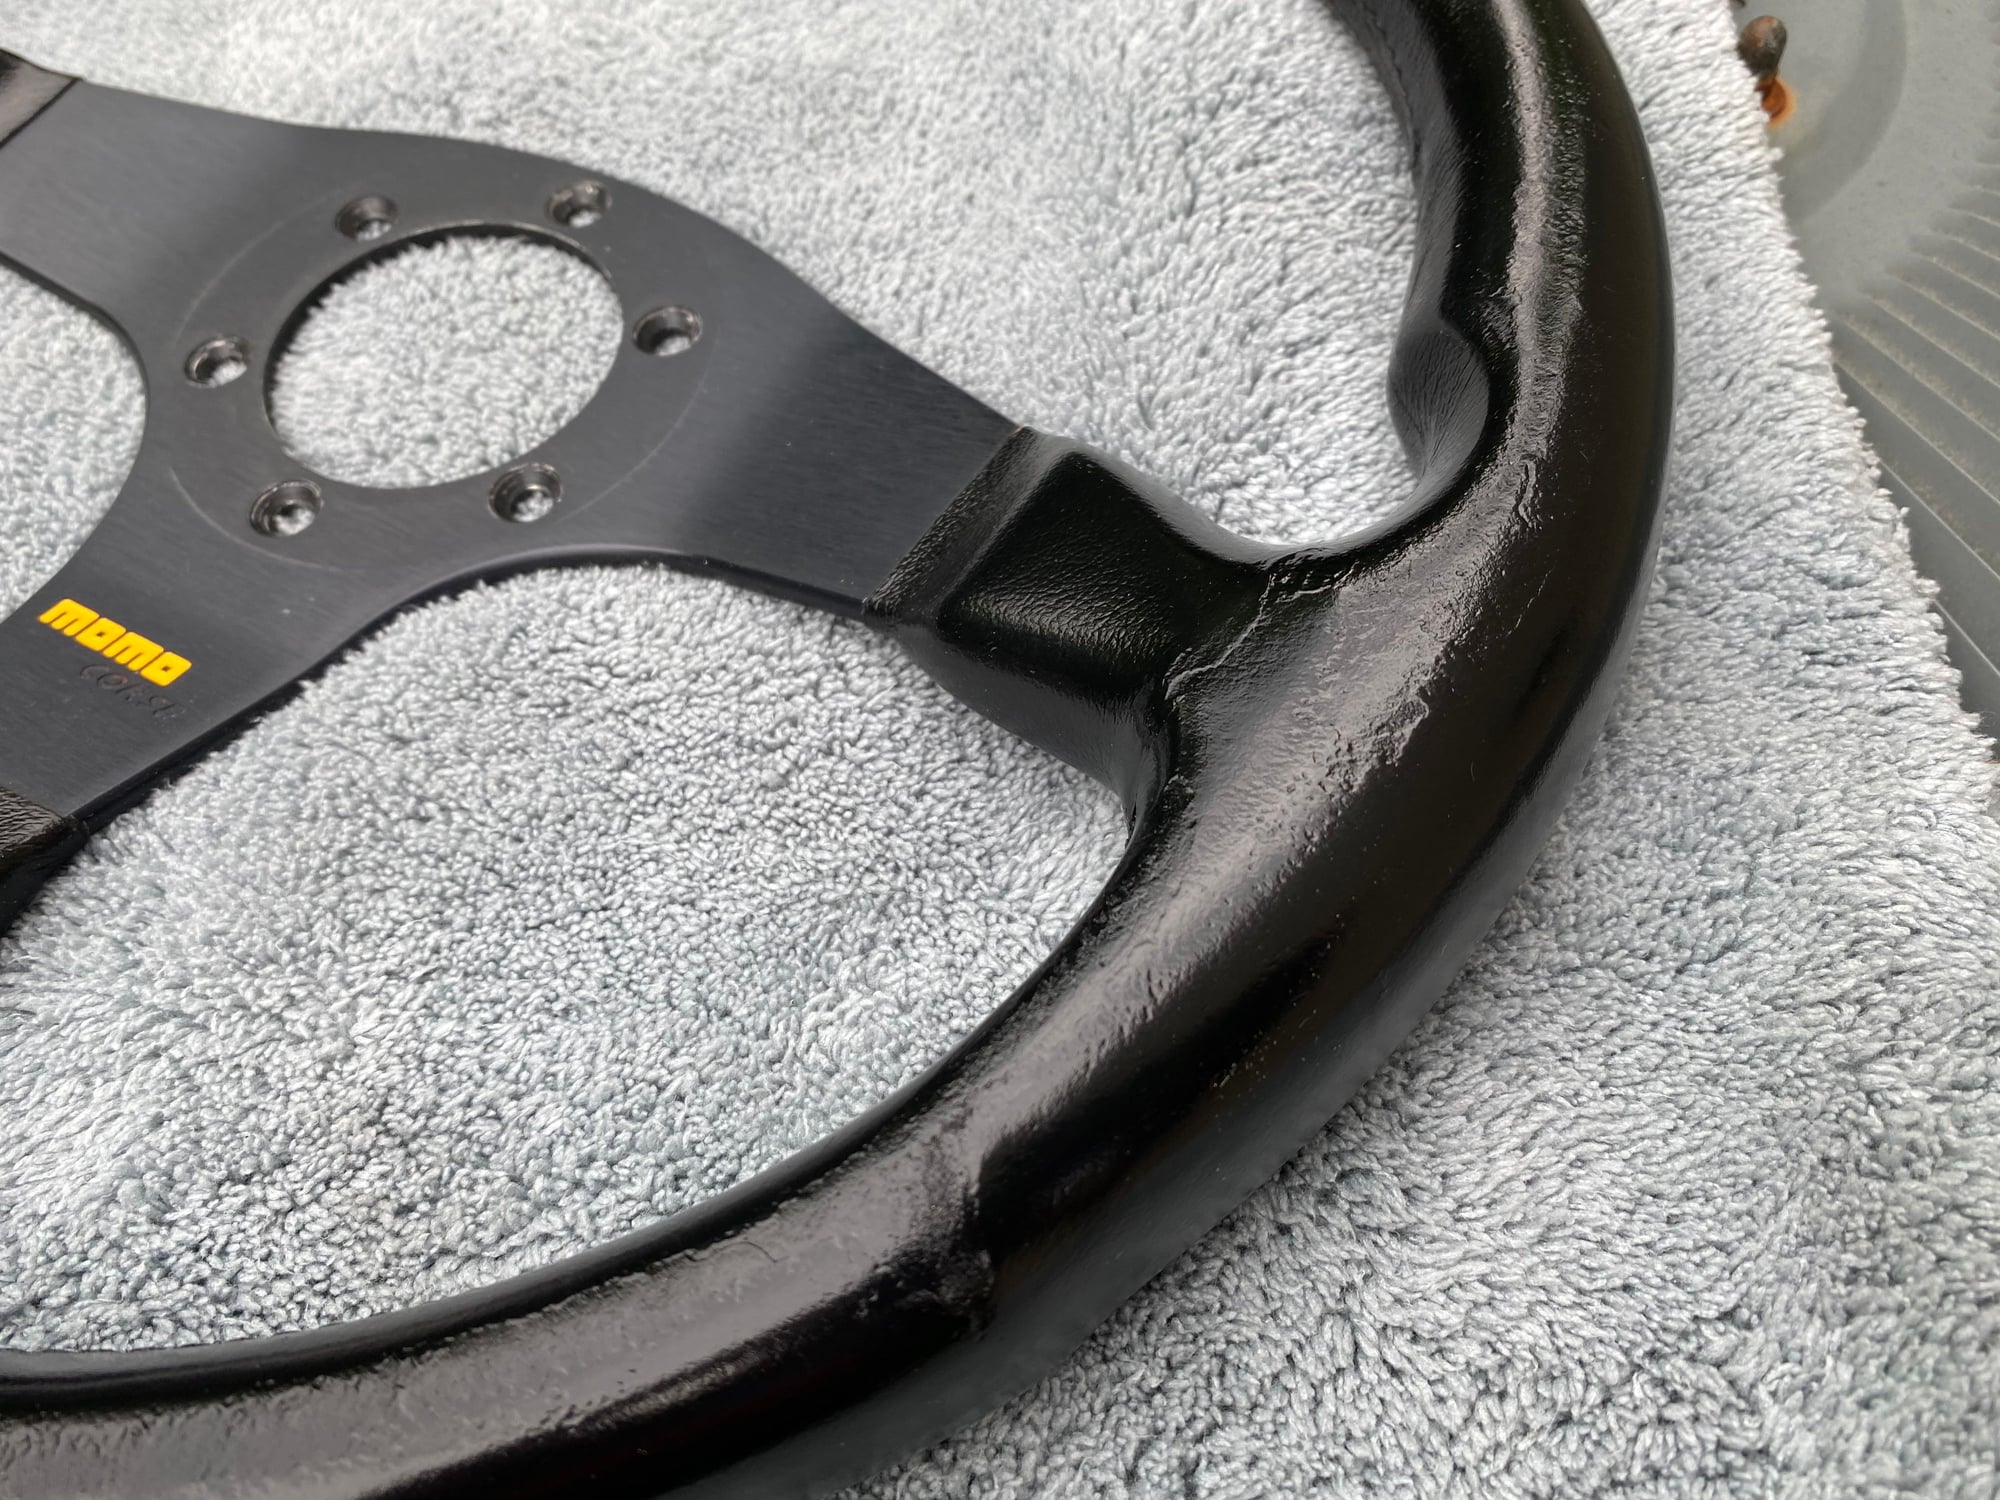 Accessories - Momo Corse steering wheel - Used - 1986 to 1995 Mazda RX-7 - Prince Frederick, MD 20678, United States